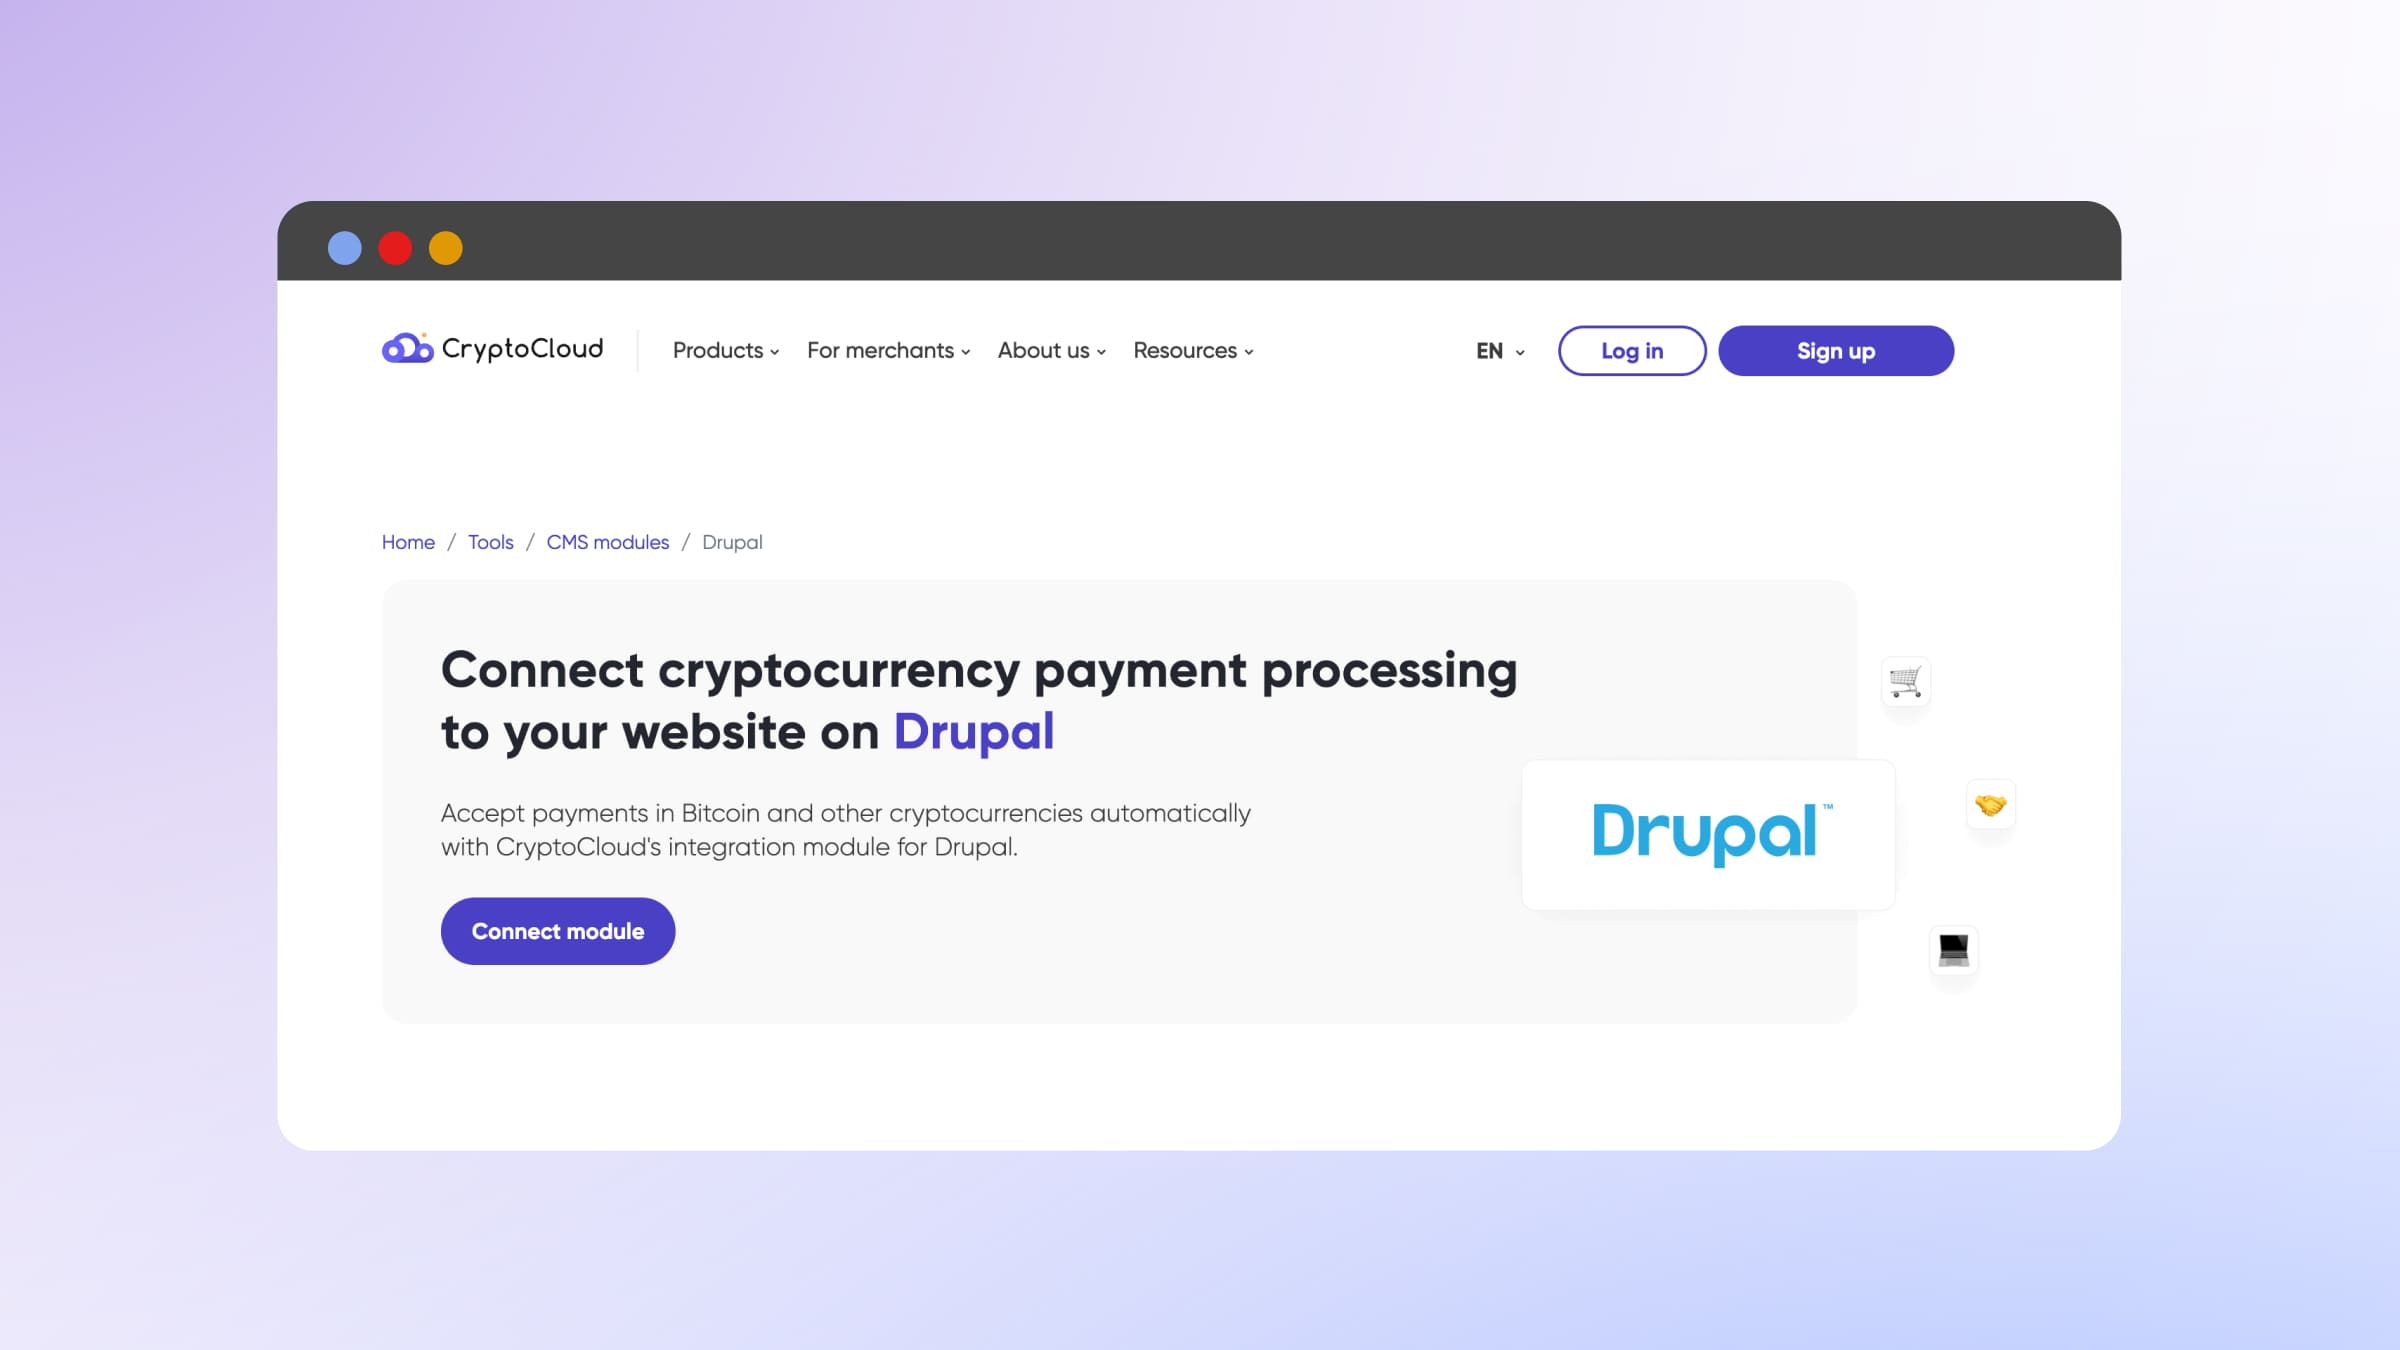 CryptoCloud allows you to connect a cryptocurrency payment gateway to a website on Drupal.